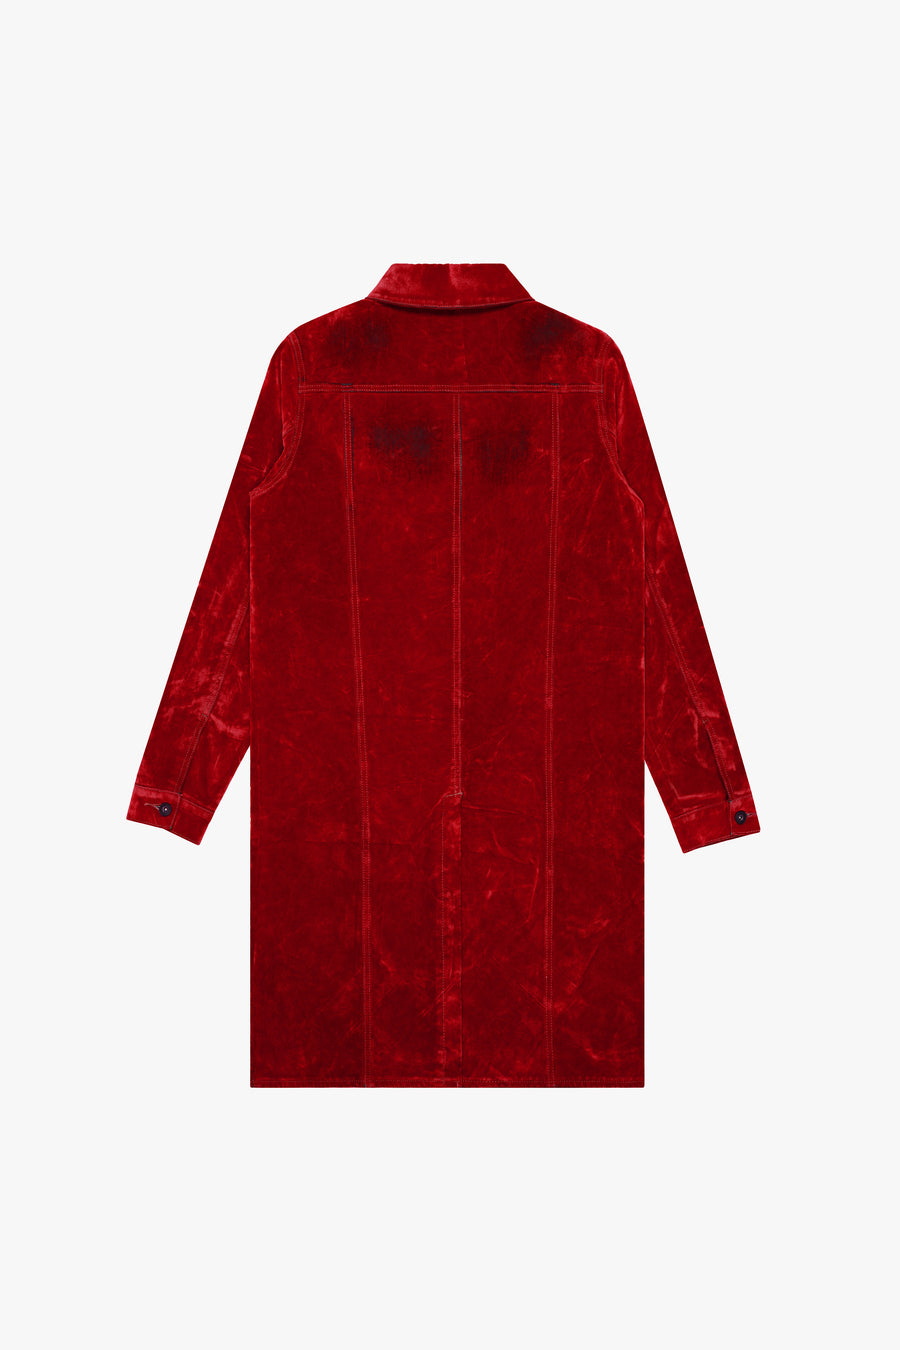 "NOCTURNE" RED SUEDE TRENCH COAT